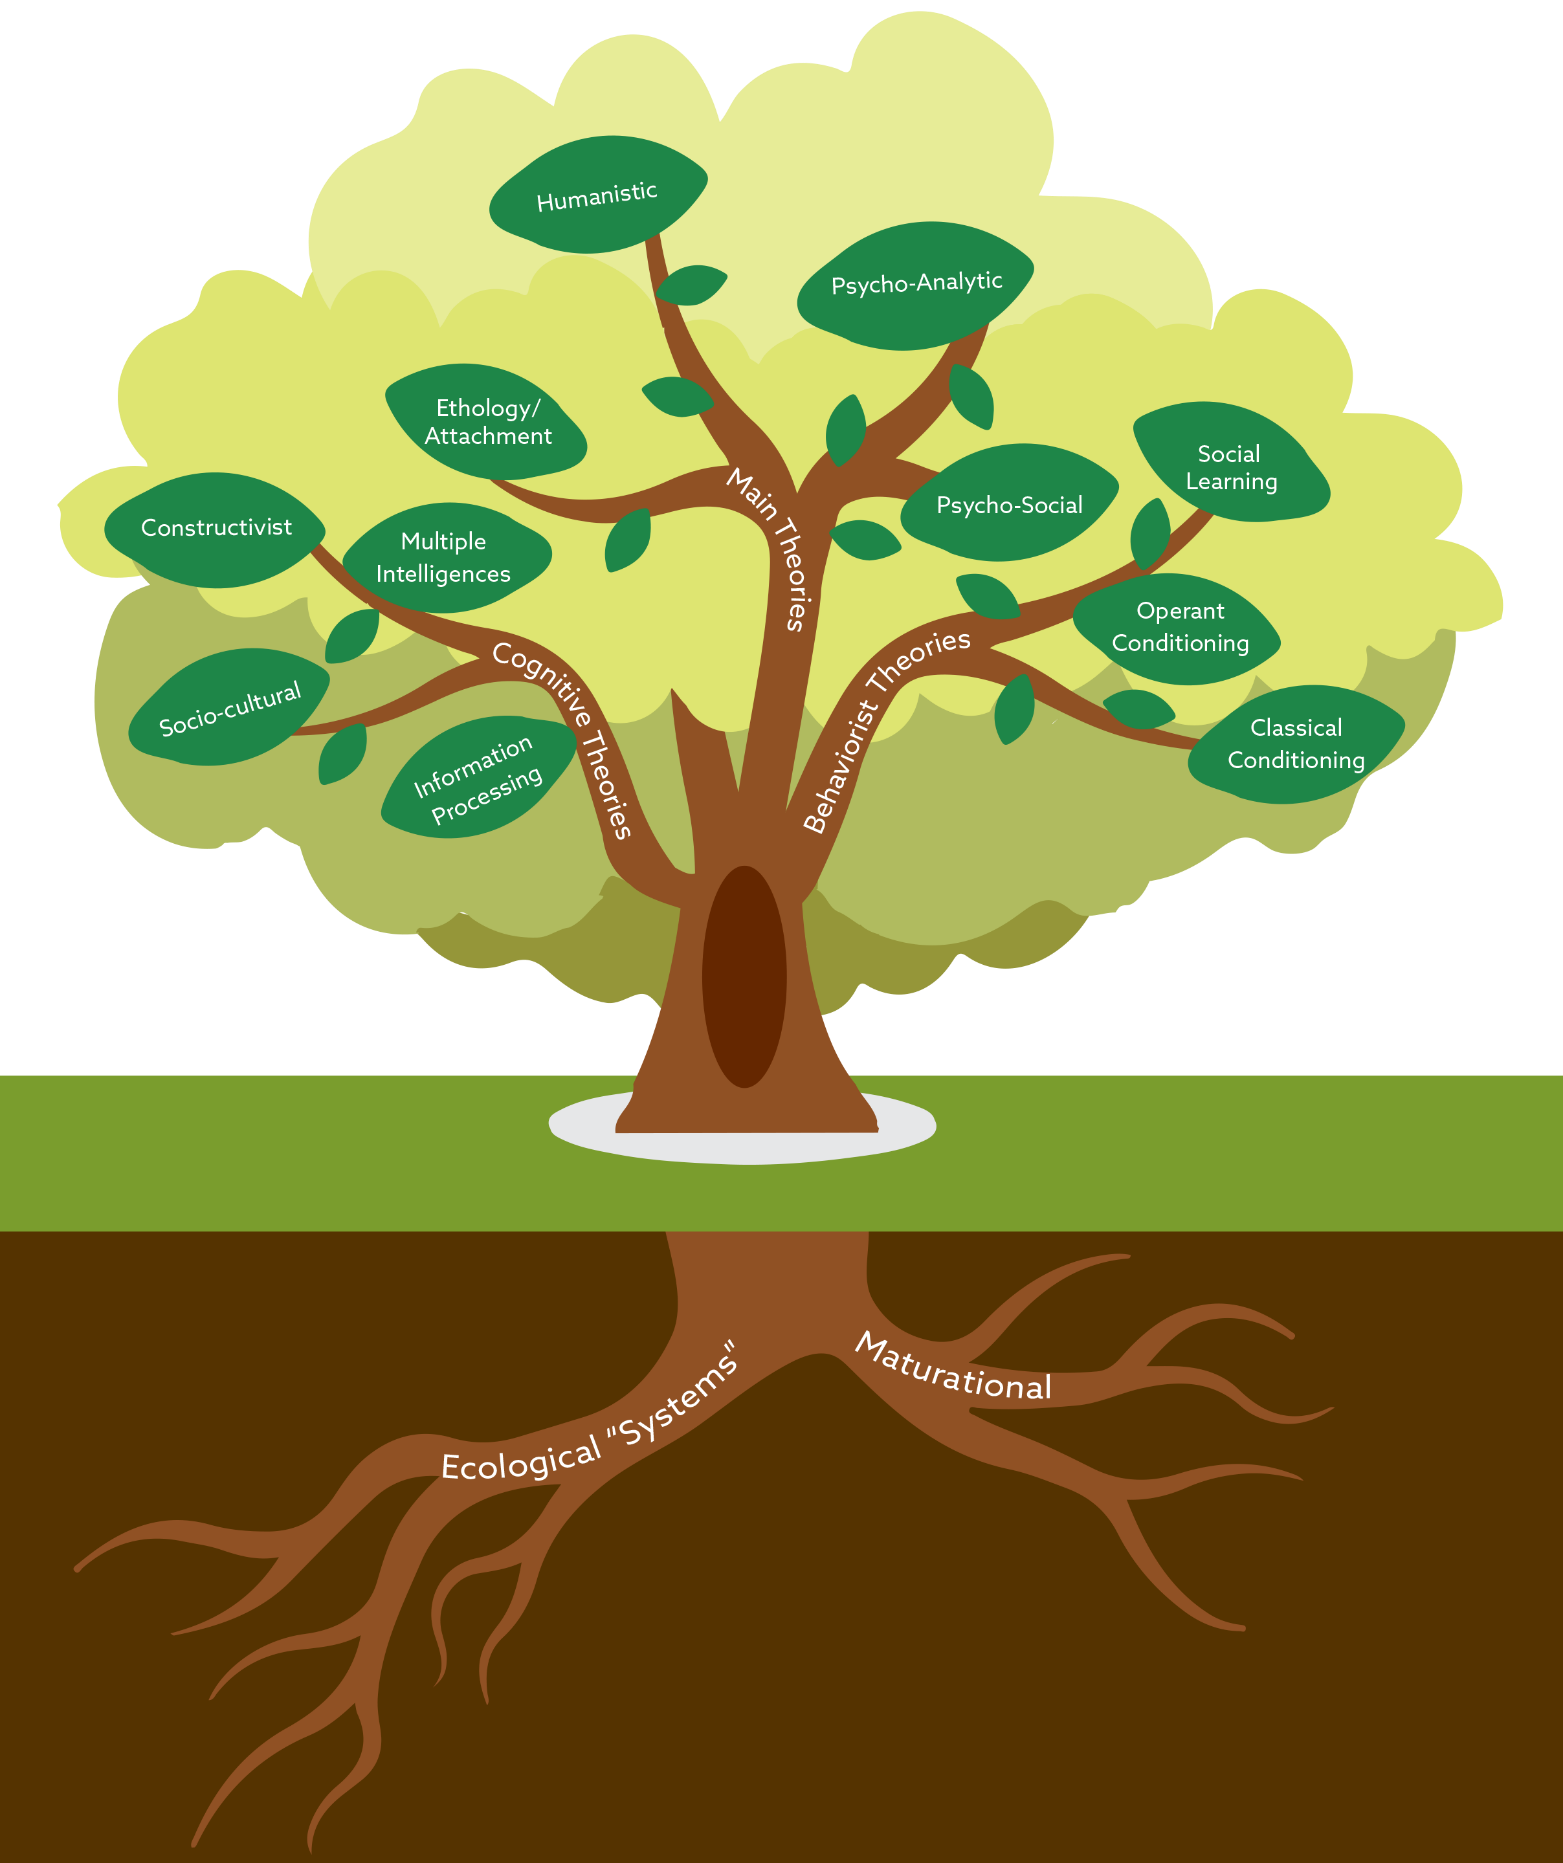 A tree that illustrates all the theories mentioned in the table below, the two roots f the tree are labeled Ecological systems and Maturational. The three branches of the tree are labeled: Main theories, cognitive theories, and behaviorist theories. There are several leaves on each branch referring to the specific theories withi9n each field. On the cognitive branch the leaves read: Socio cultural, Information processing, Constructivist, and multiple intelligences. The leaves on the main theories branch read: Ethology/Attachment, Humanistic, Psycho-Analytical, and Psycho-Social. The leaves on the Behaviorist branch read: Social learning, Operant conditioning, and classical conditioning. 